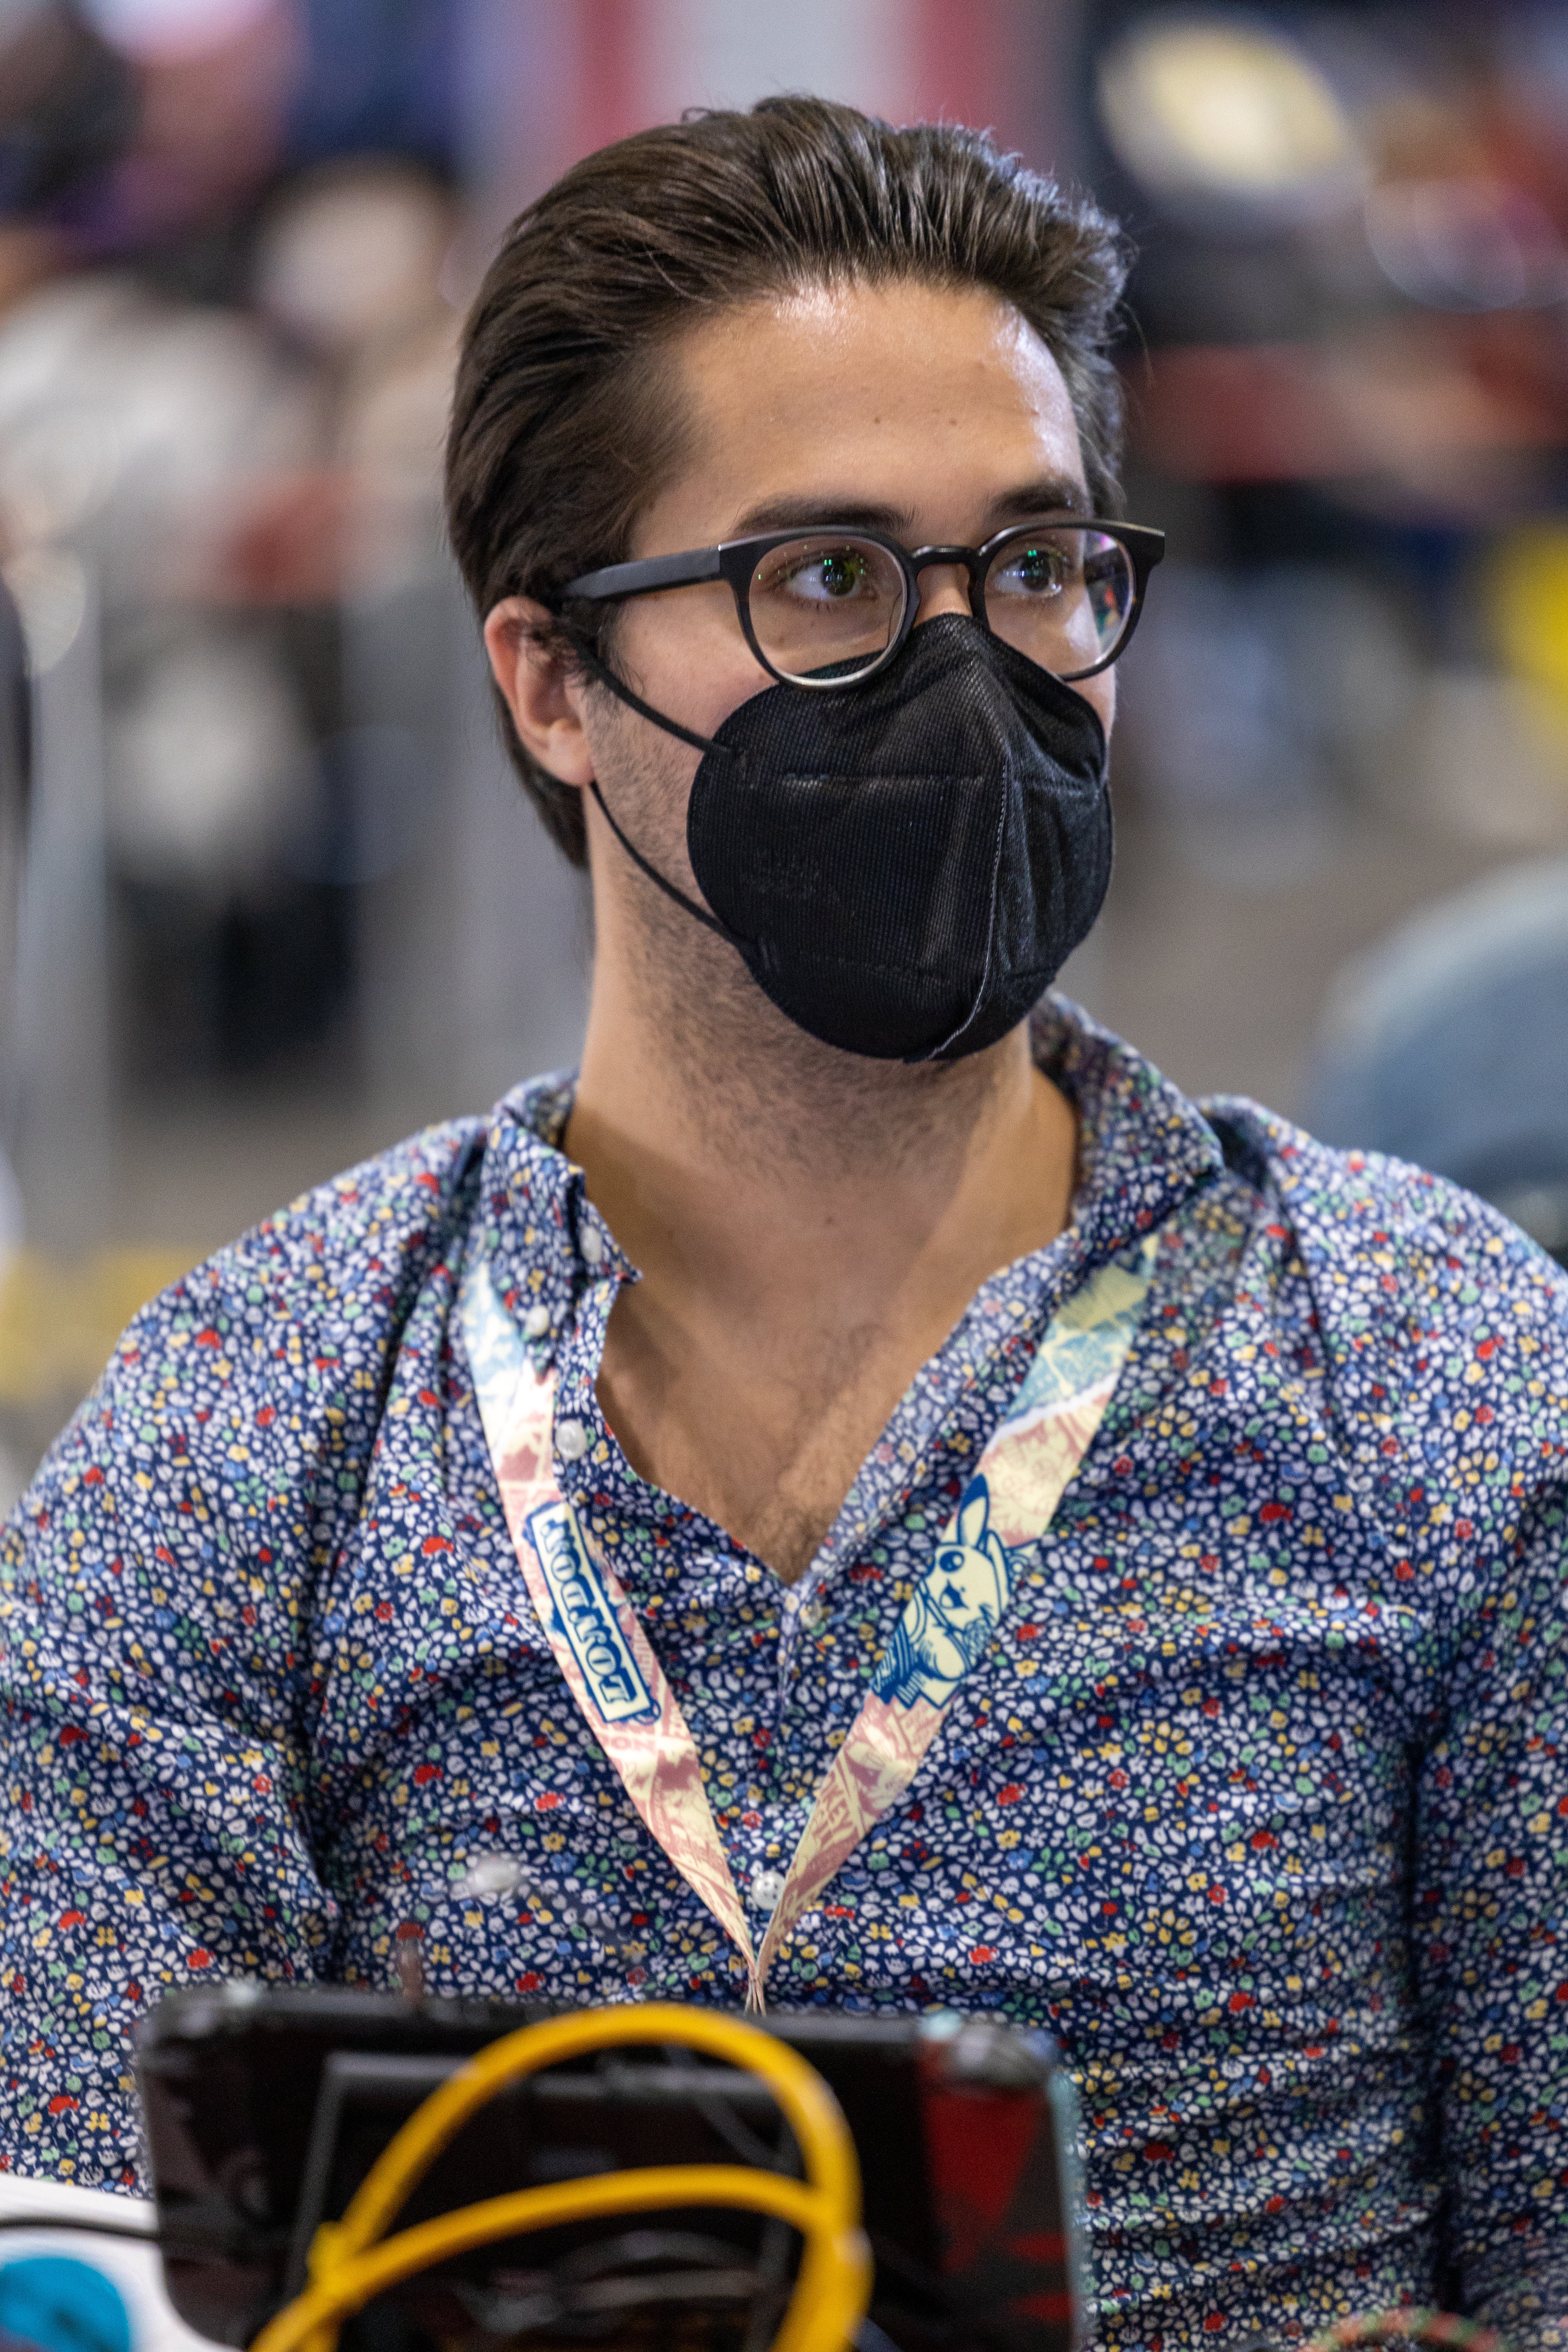 A portrait photograph of Pokemon champion Wolfe Glick looking off to the camera's right. He's nicely groomed, with hair brushed back and a patterned shirt on. A black face mask and glasses cover much of his face.